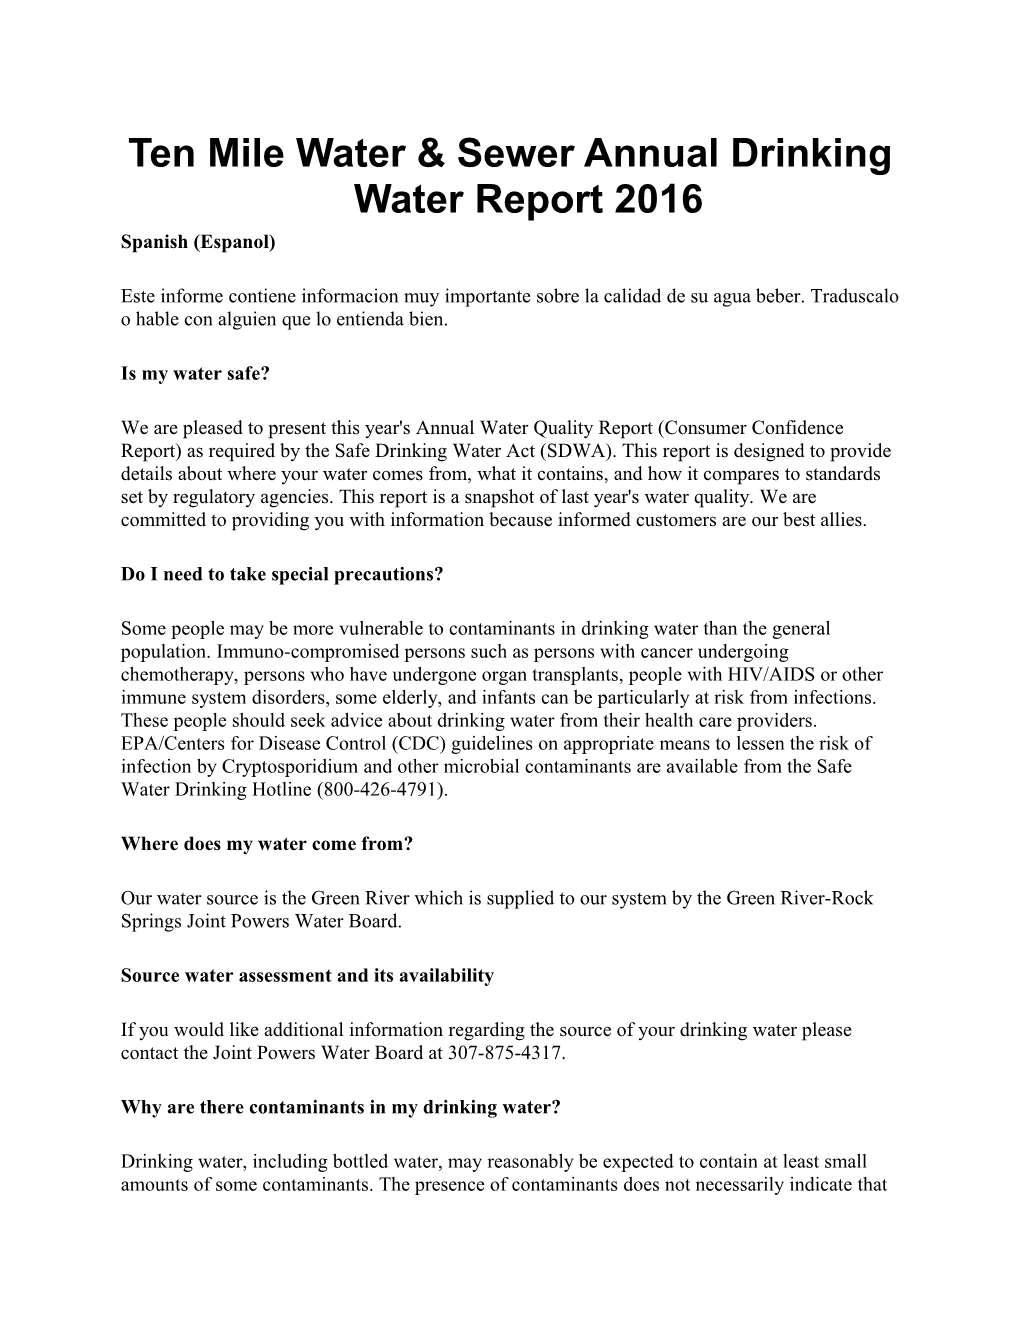 Ten Mile Water & Sewer Annual Drinking Water Report 2016